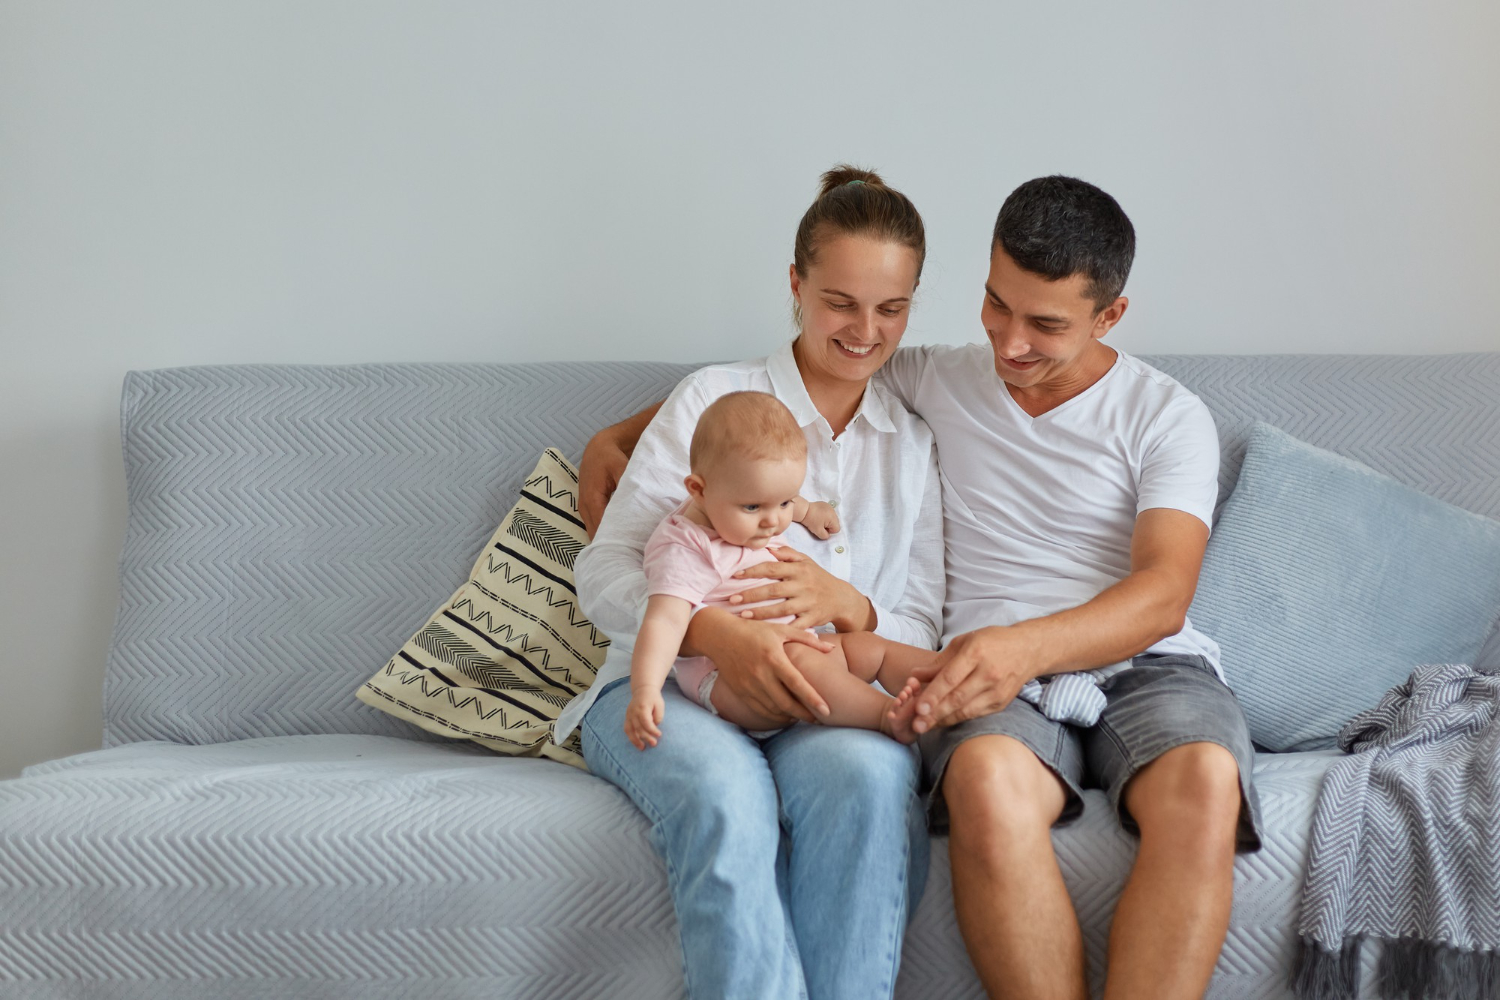 portrait-happy-family-sitting-sofa-living-room-people-wearing-casual-clothing-spending-time-with-their-infant-baby-home-parenthood-childhood